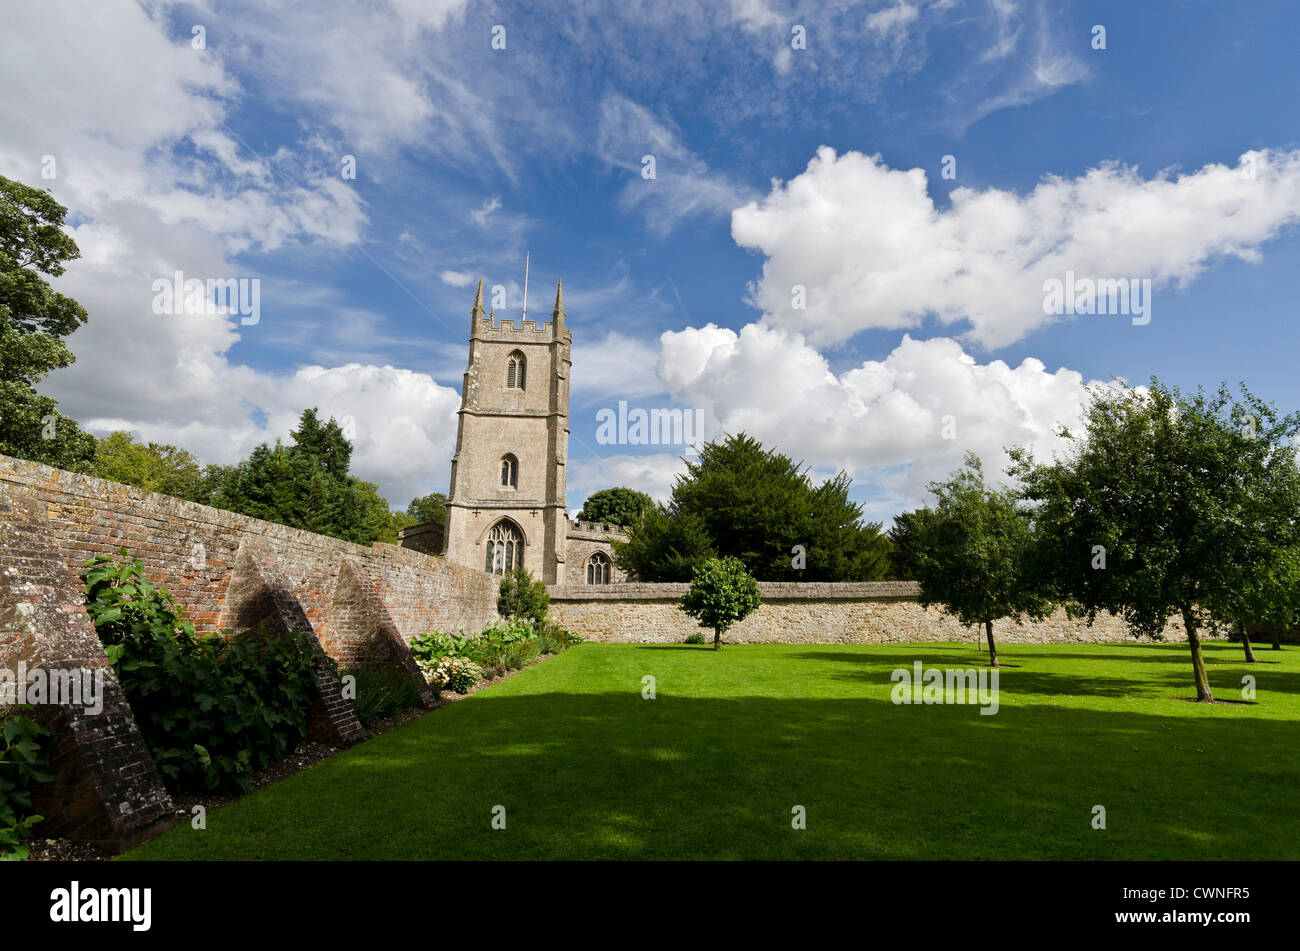 Avebury Wiltshire church with manor house walled garden Stock Photo